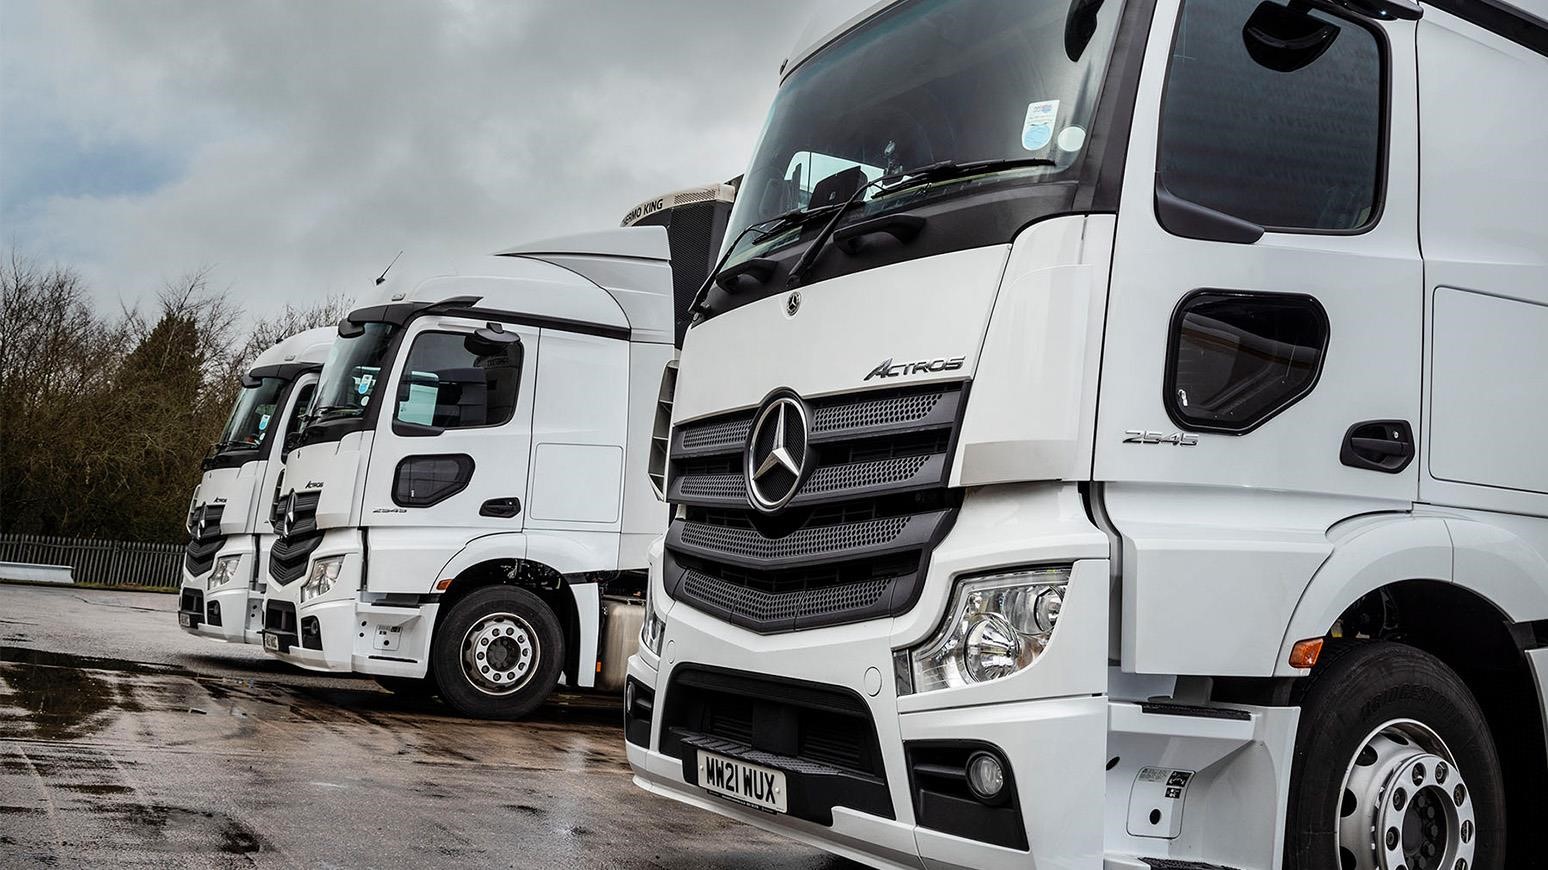 11 Mercedes-Benz Actros Tractor Units To Service National Veterinary Services Hubs Across The UK